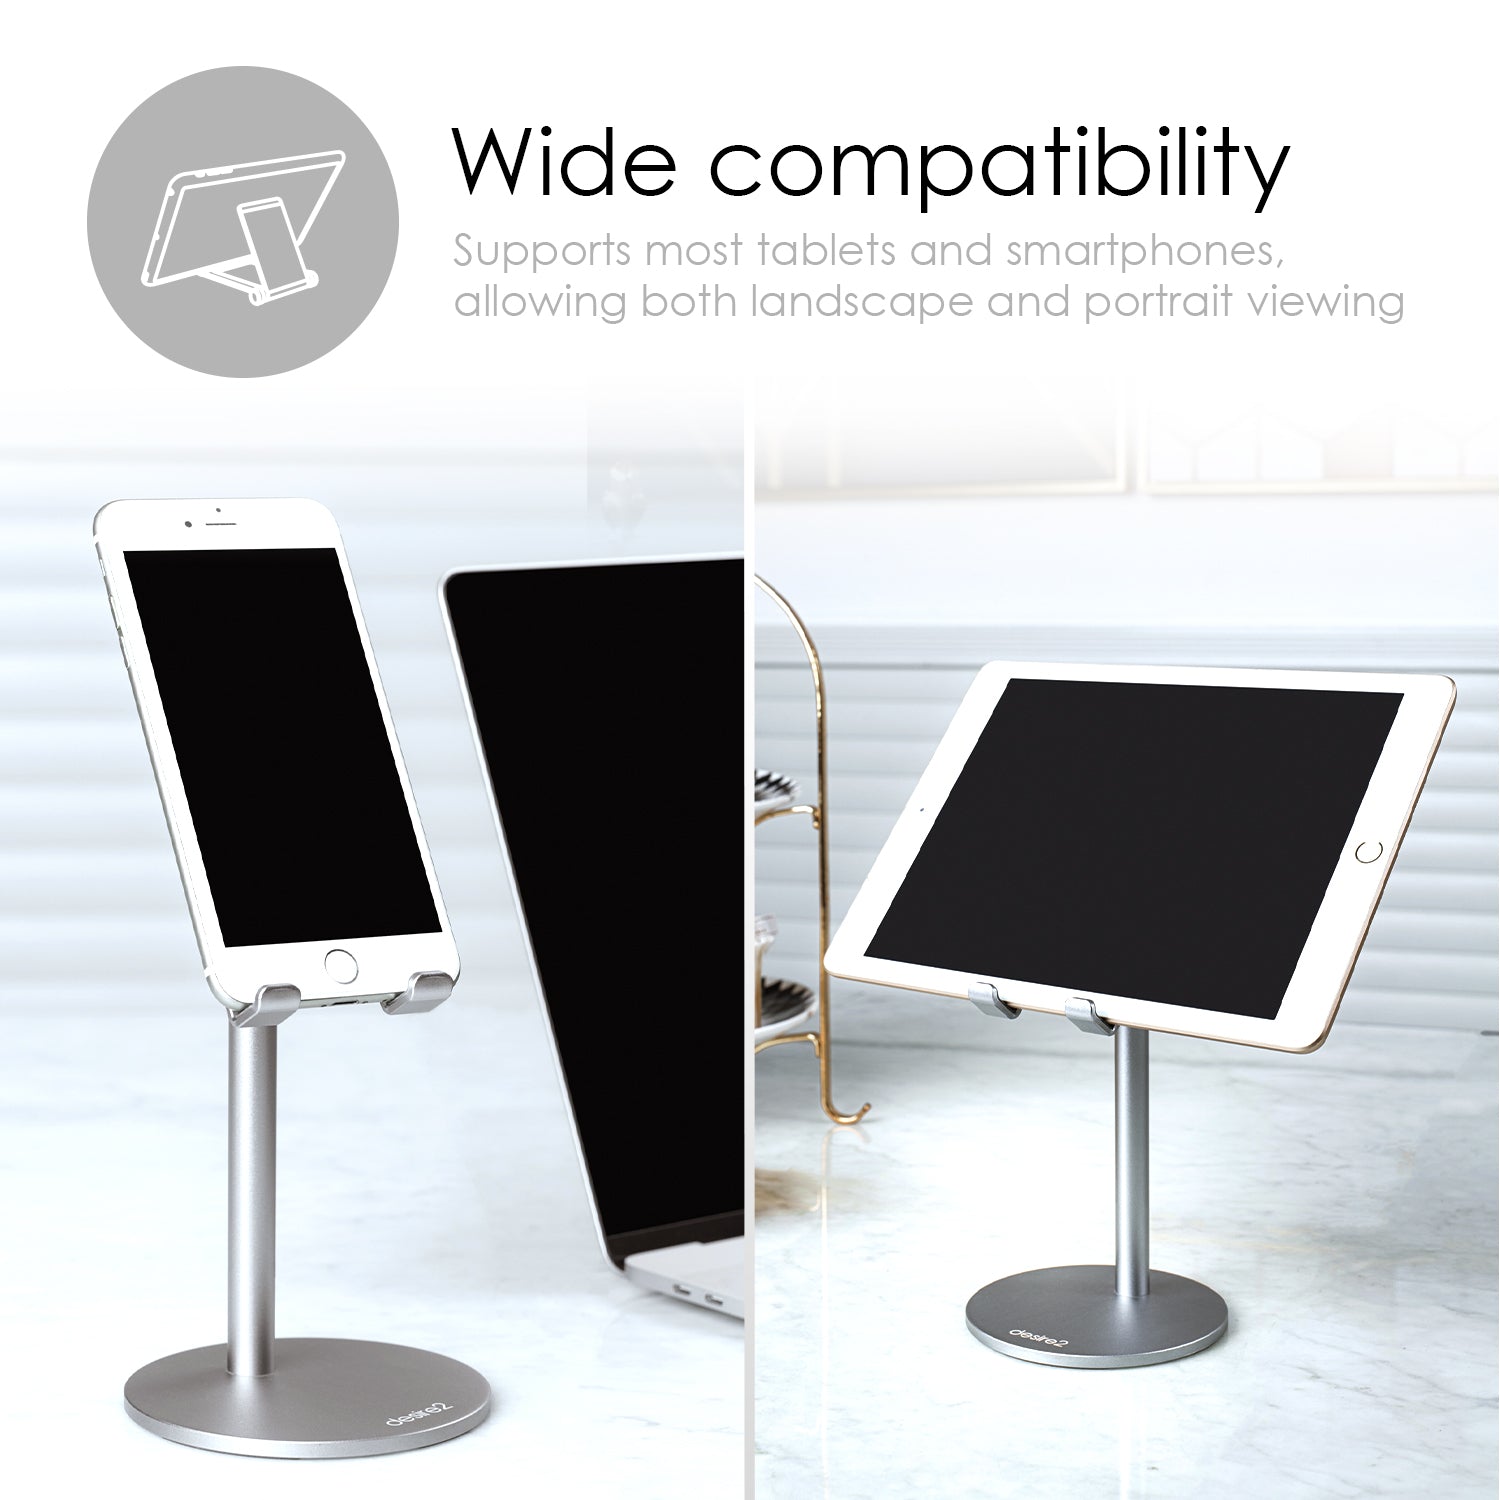 Image shows the wide compatibility  of an aluminium metal smartphone and tablet stand.   